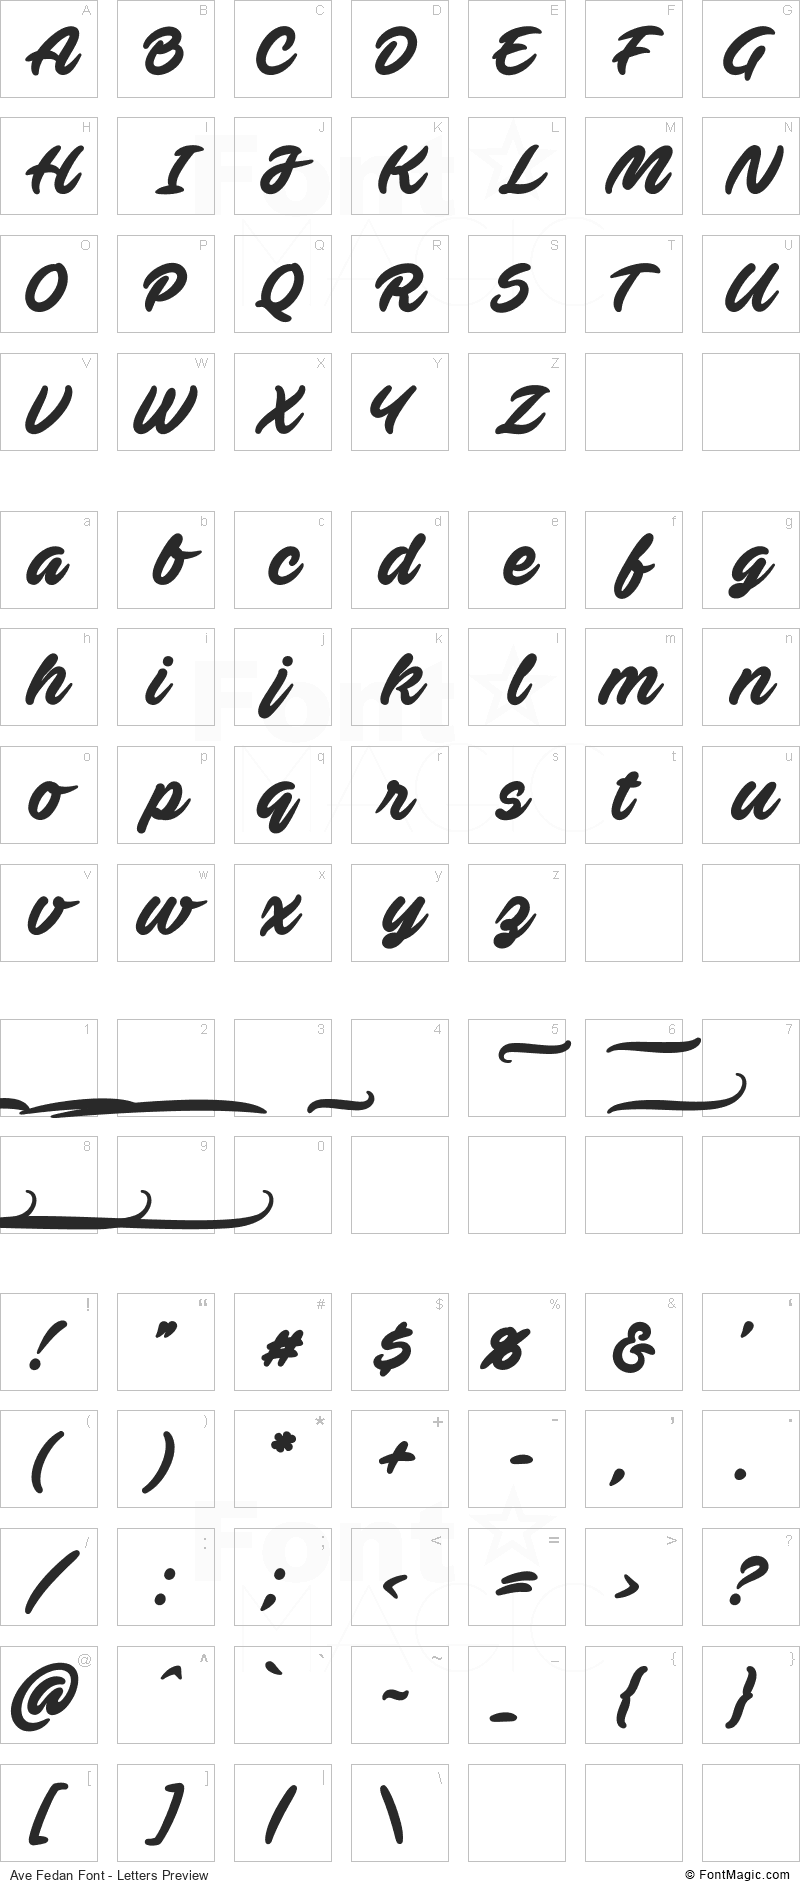 Ave Fedan Font - All Latters Preview Chart